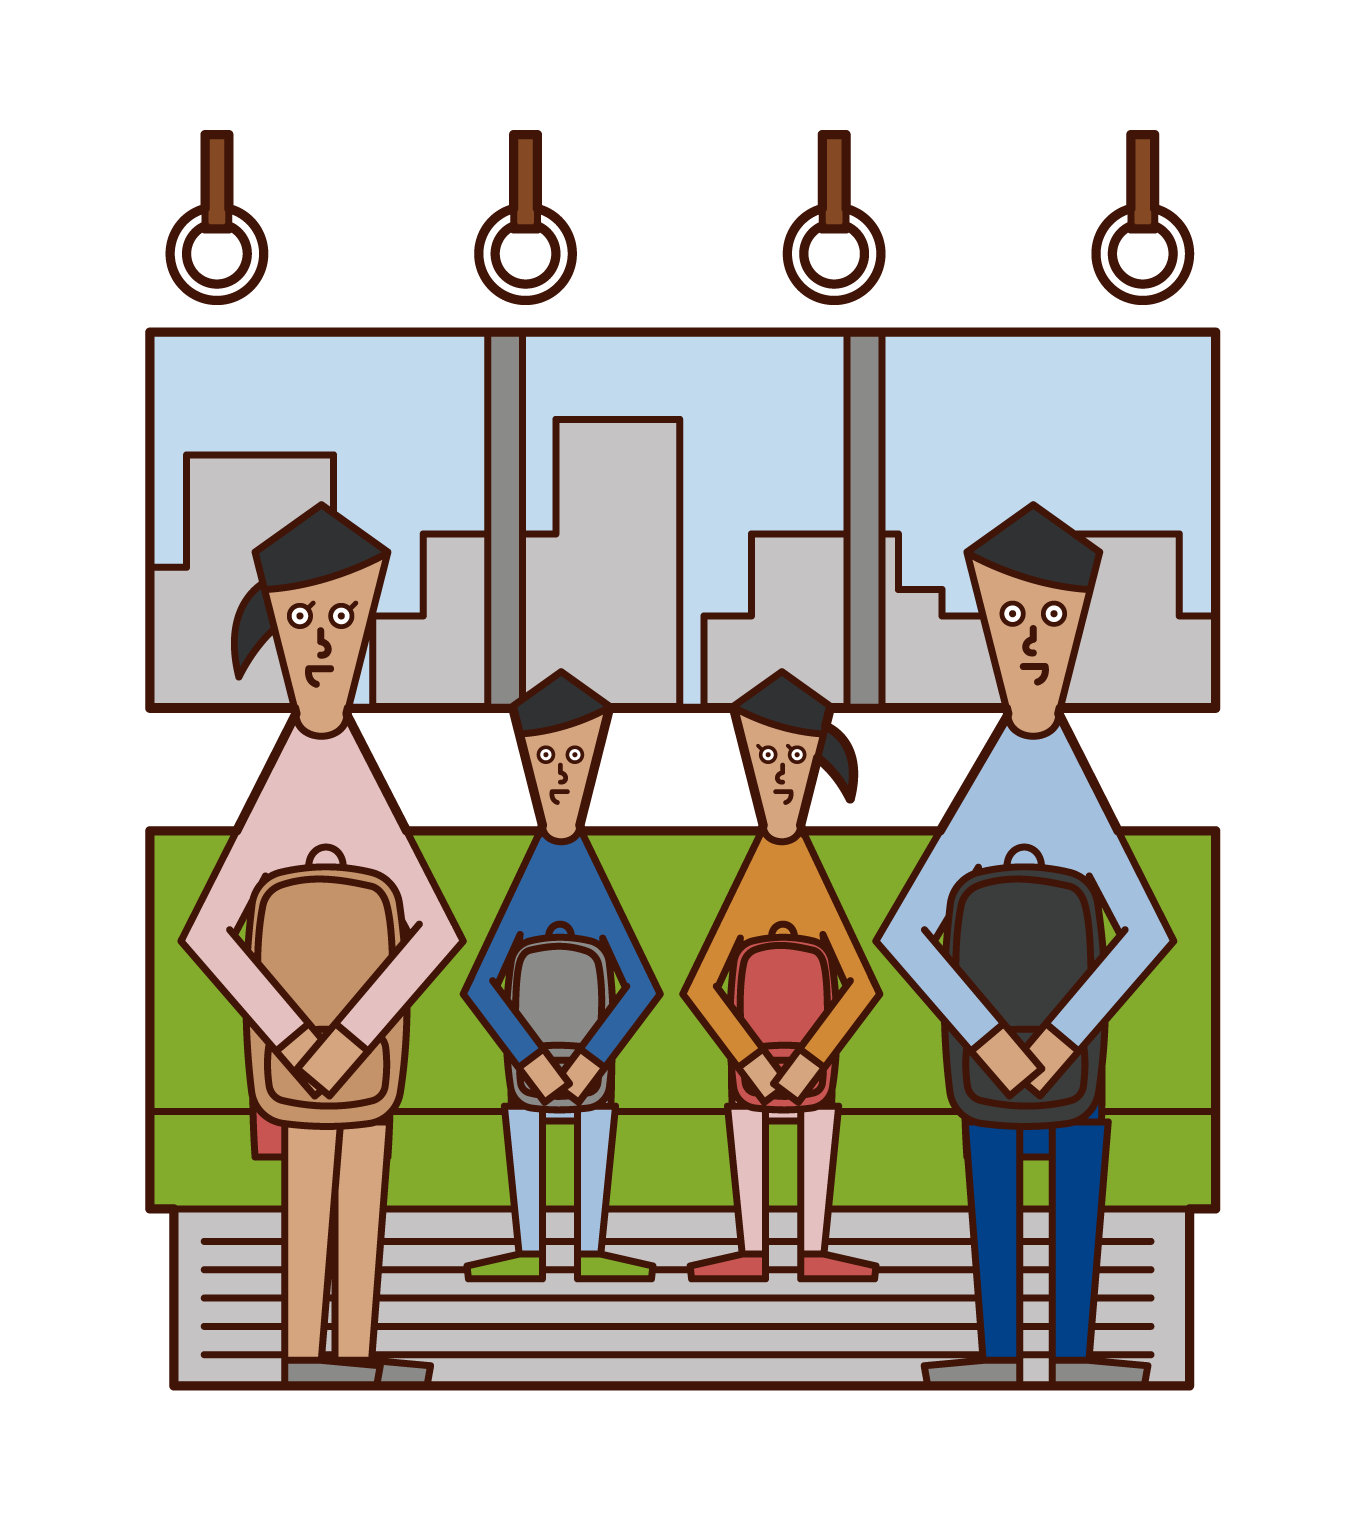 Illustration of a family riding a train